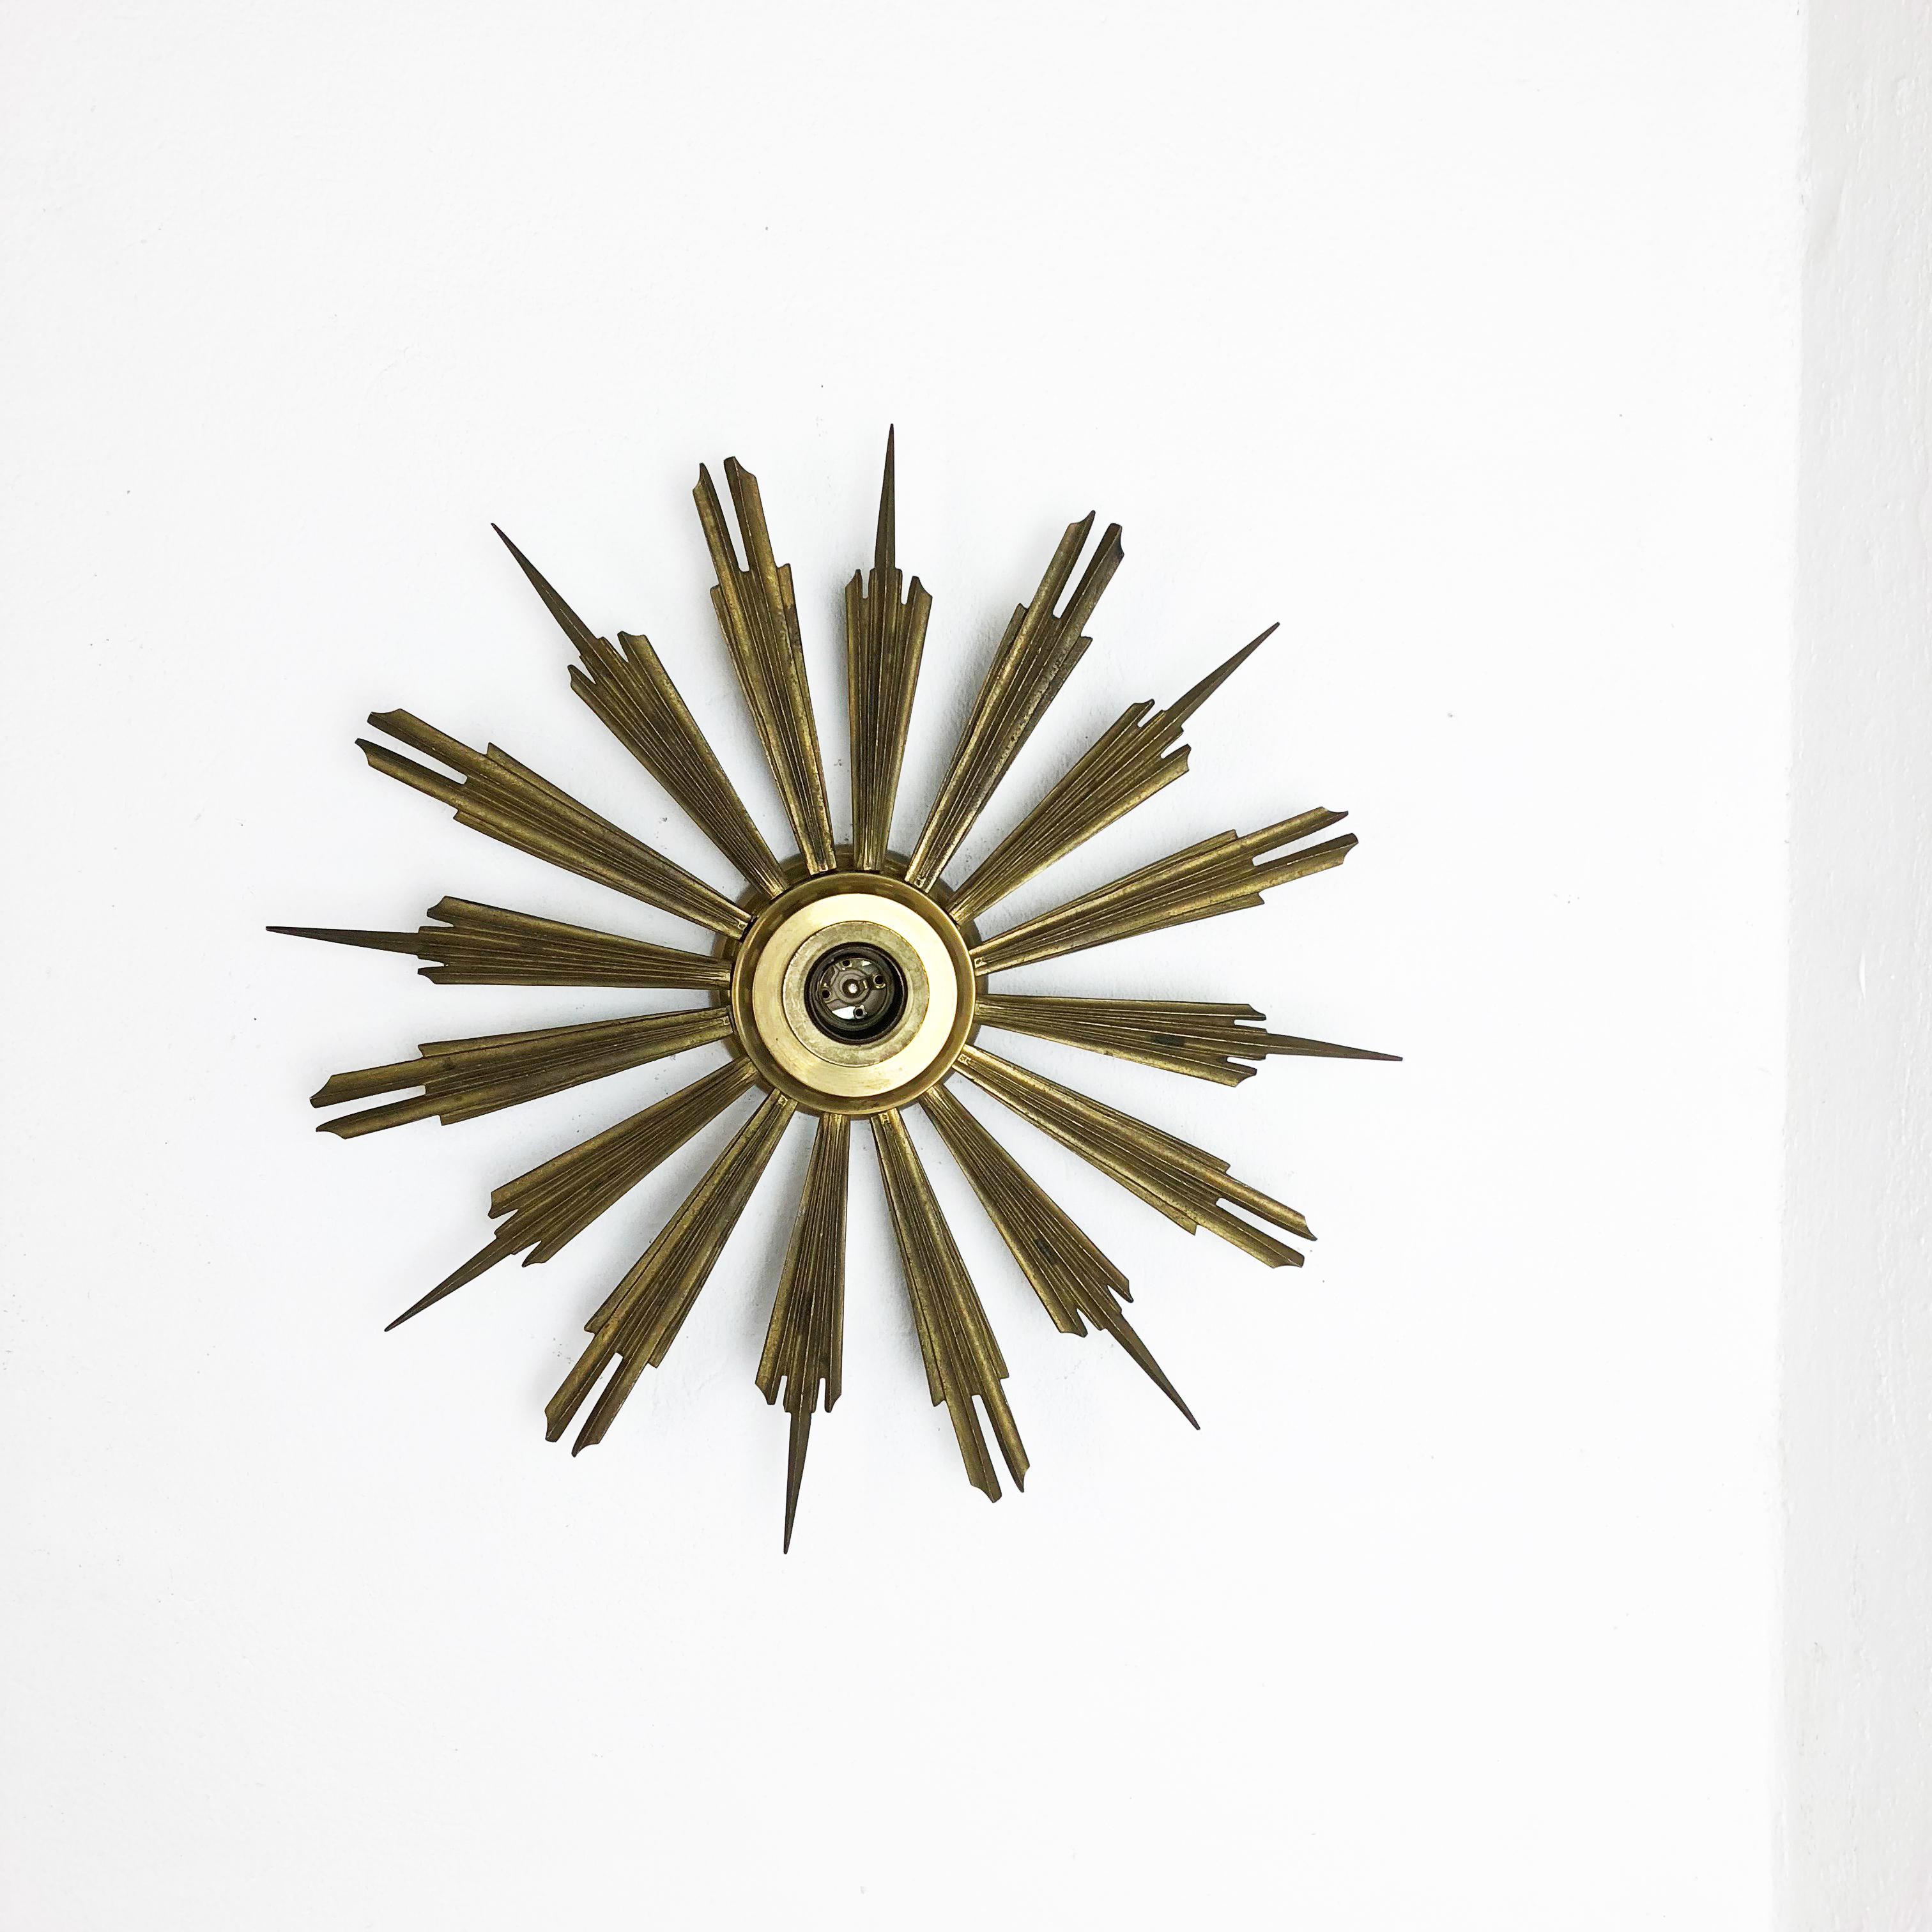 Article:

Wall light, ceiling light


Producer:

Origin Italy in the manner of Stilnovo, Gio Ponti



Age:

1950s



This modernist light was produced in Italy in the 1950s. It is made from solid brass in form of a sunburst with